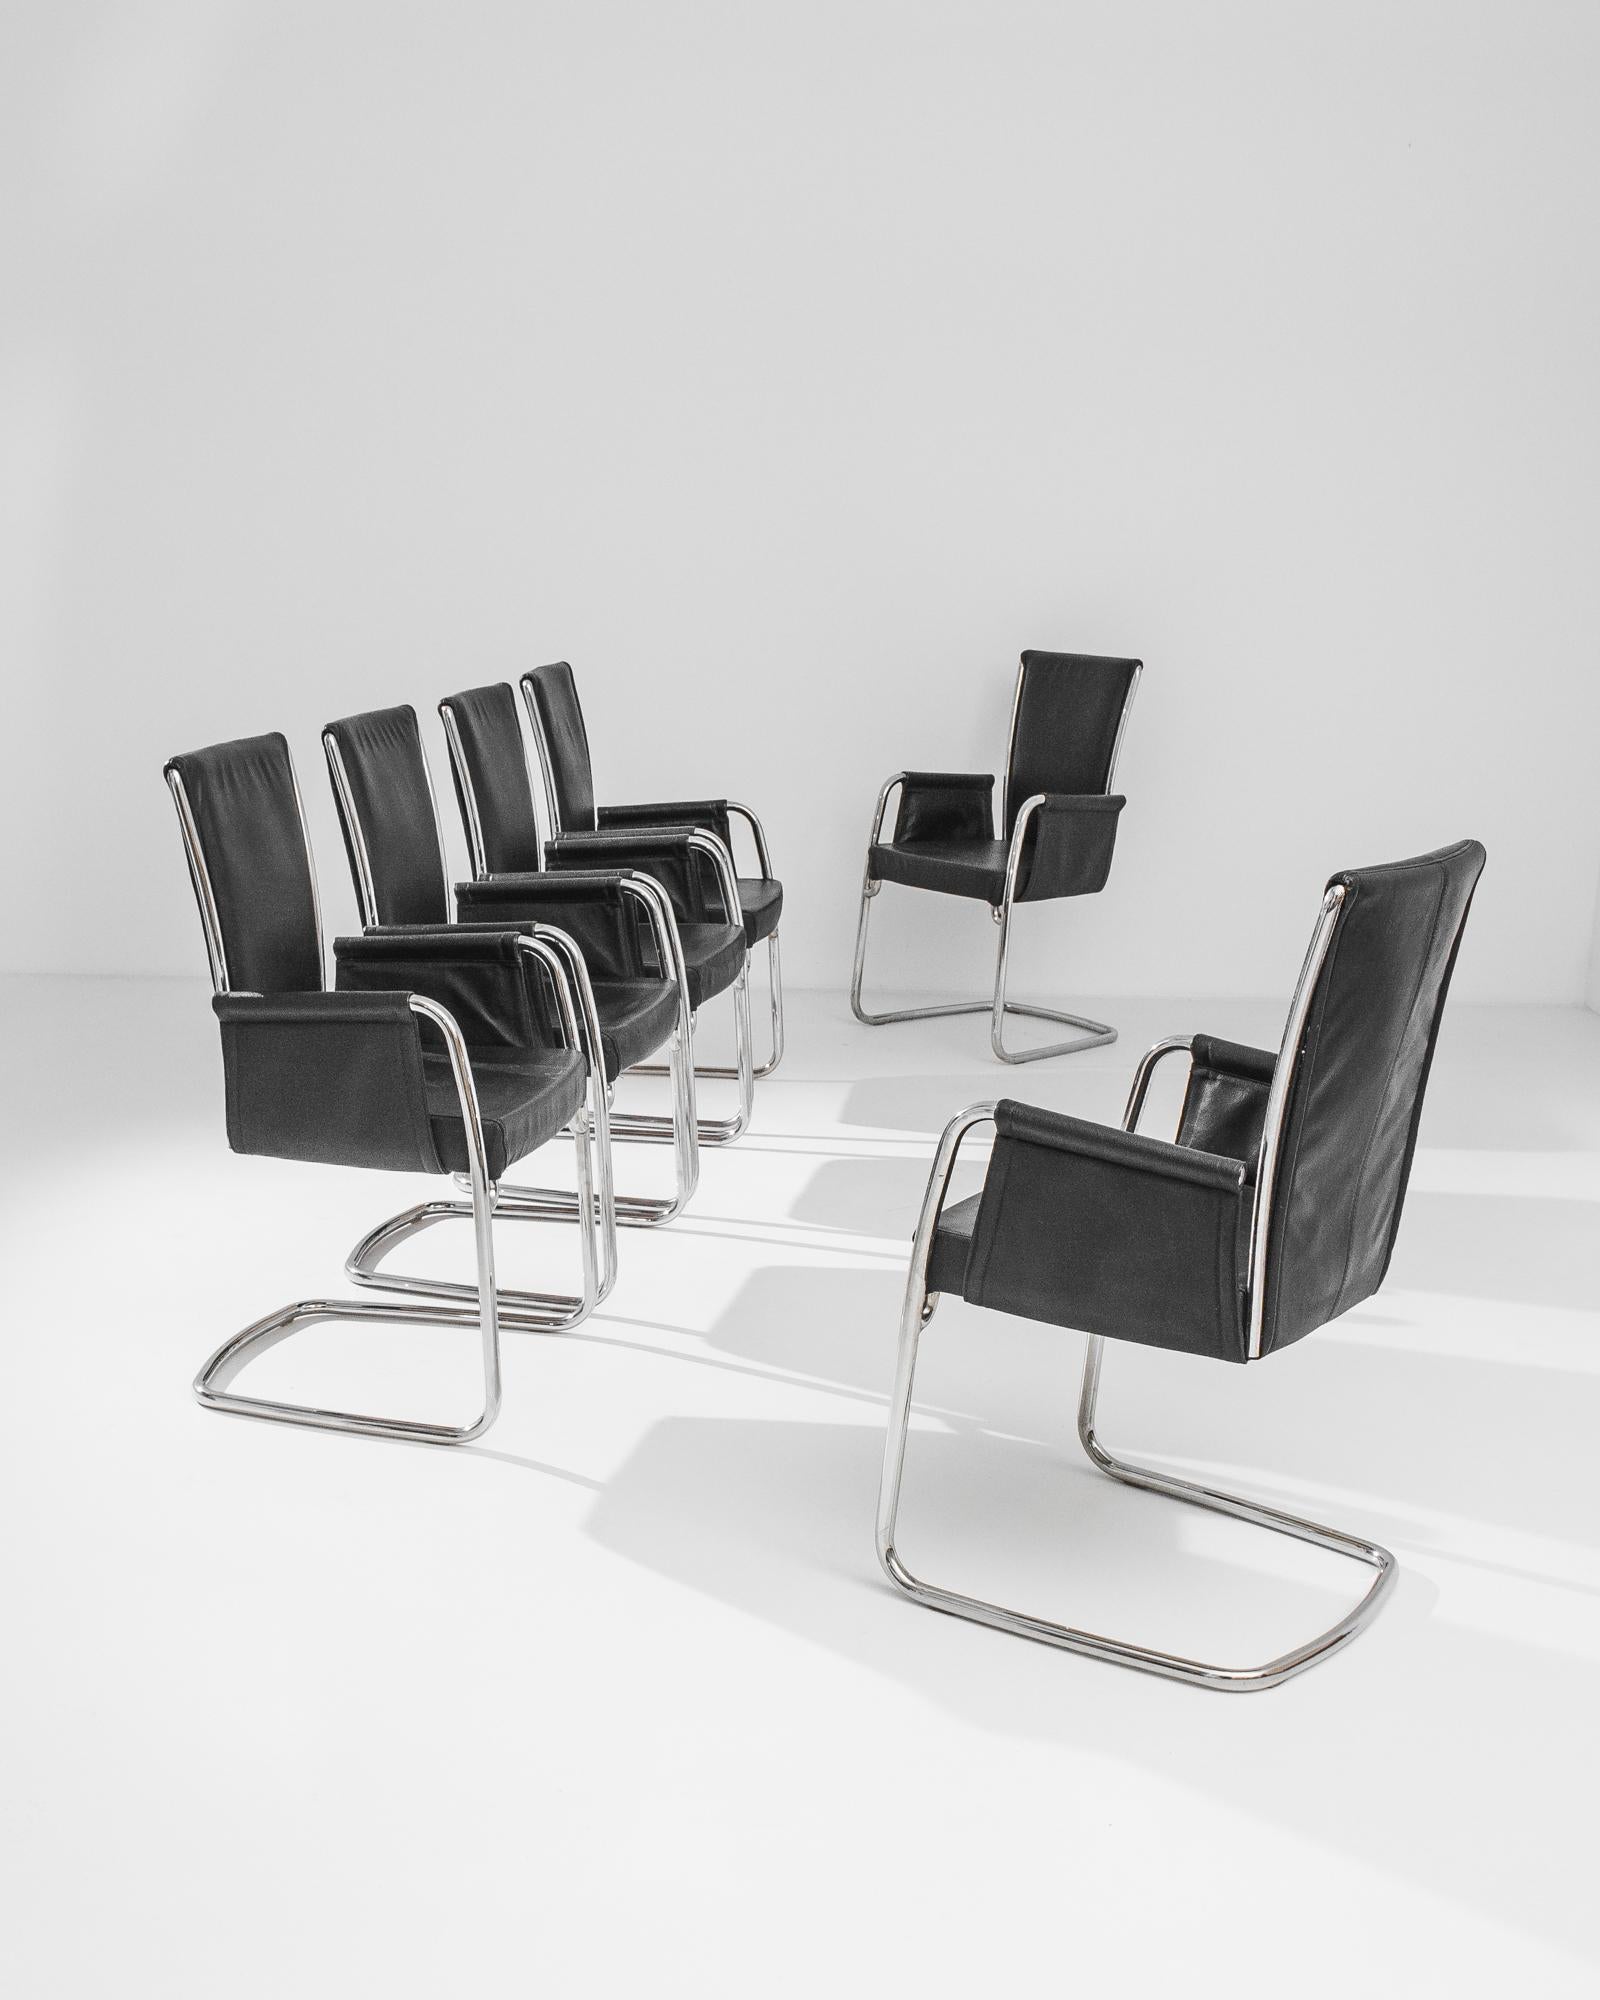 A set of six contemporary dining chairs from 1980s Italy. Made by furniture designers Effezeta, a sleek combination of polished silver metal and black leather creates a modish impression. The cantilevered silhouette has a minimalist poise, creating